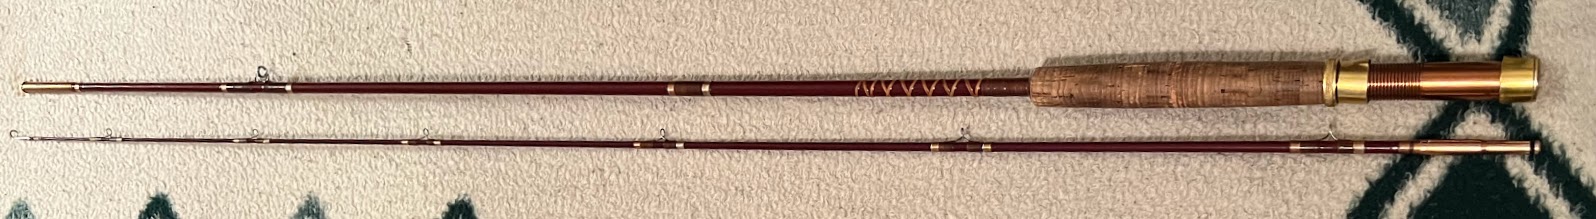 The rarest Fenwick fly rods (revisited), Collecting Fiberglass Fly Rods